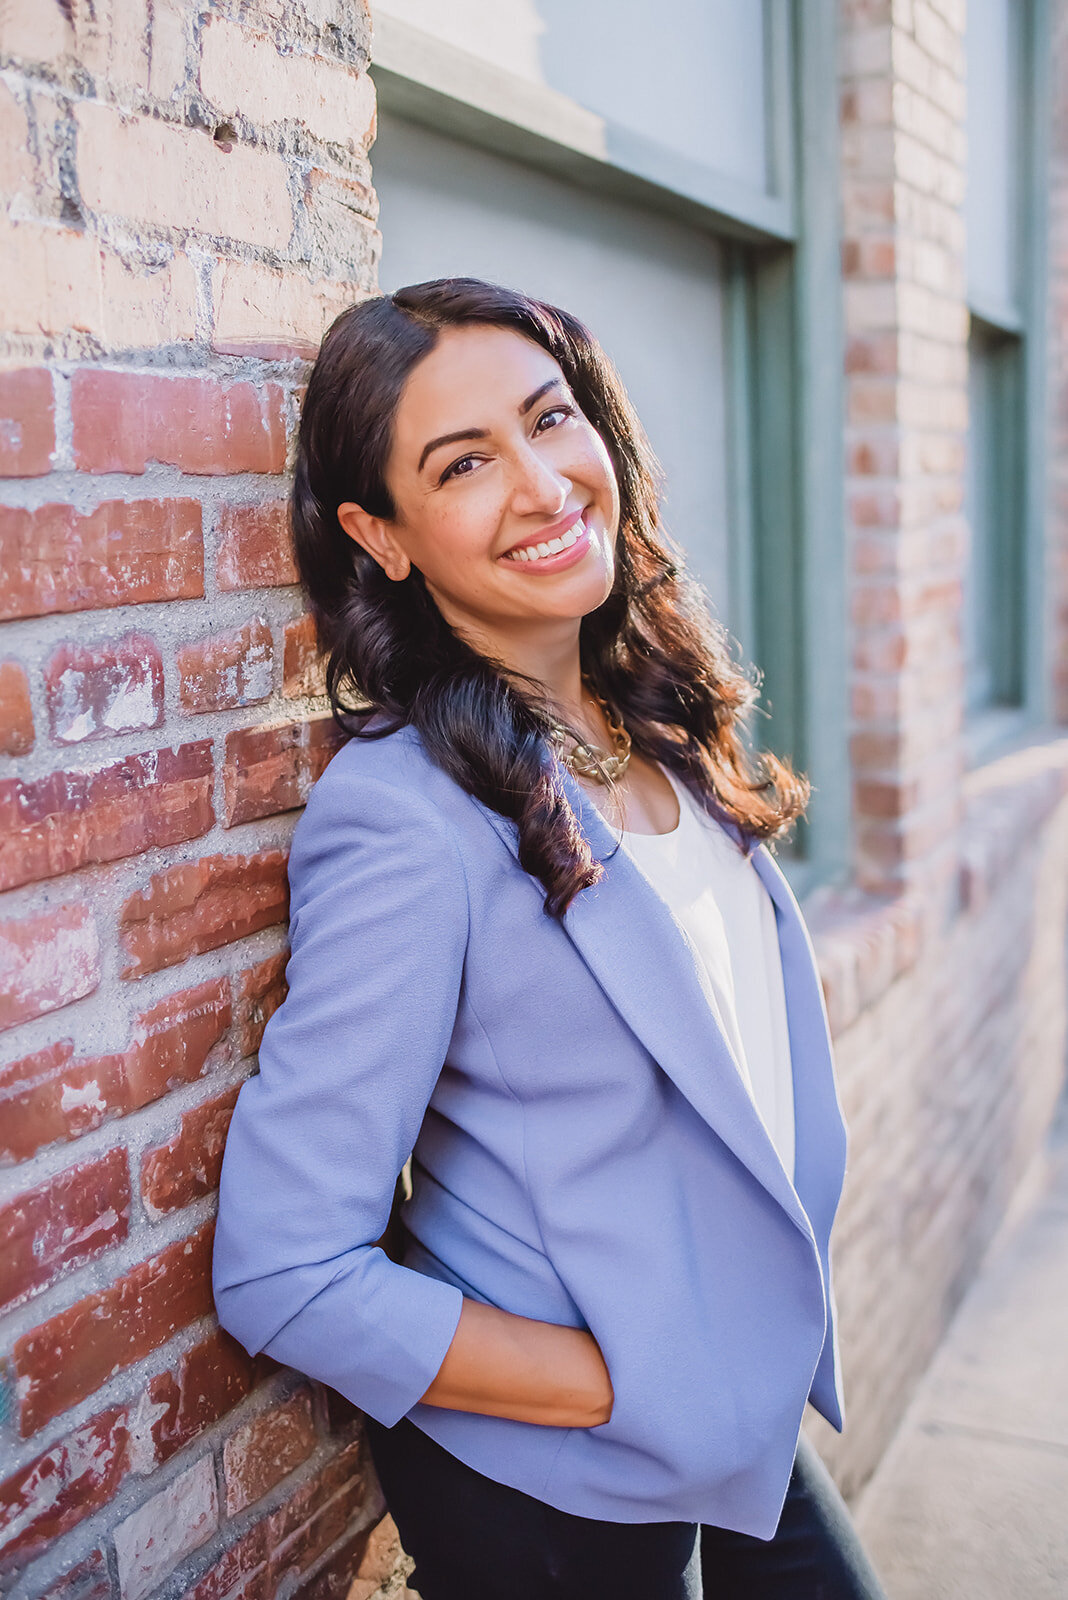 Hajar leans against a brickwall in Los Angeles and smiles for headshots.